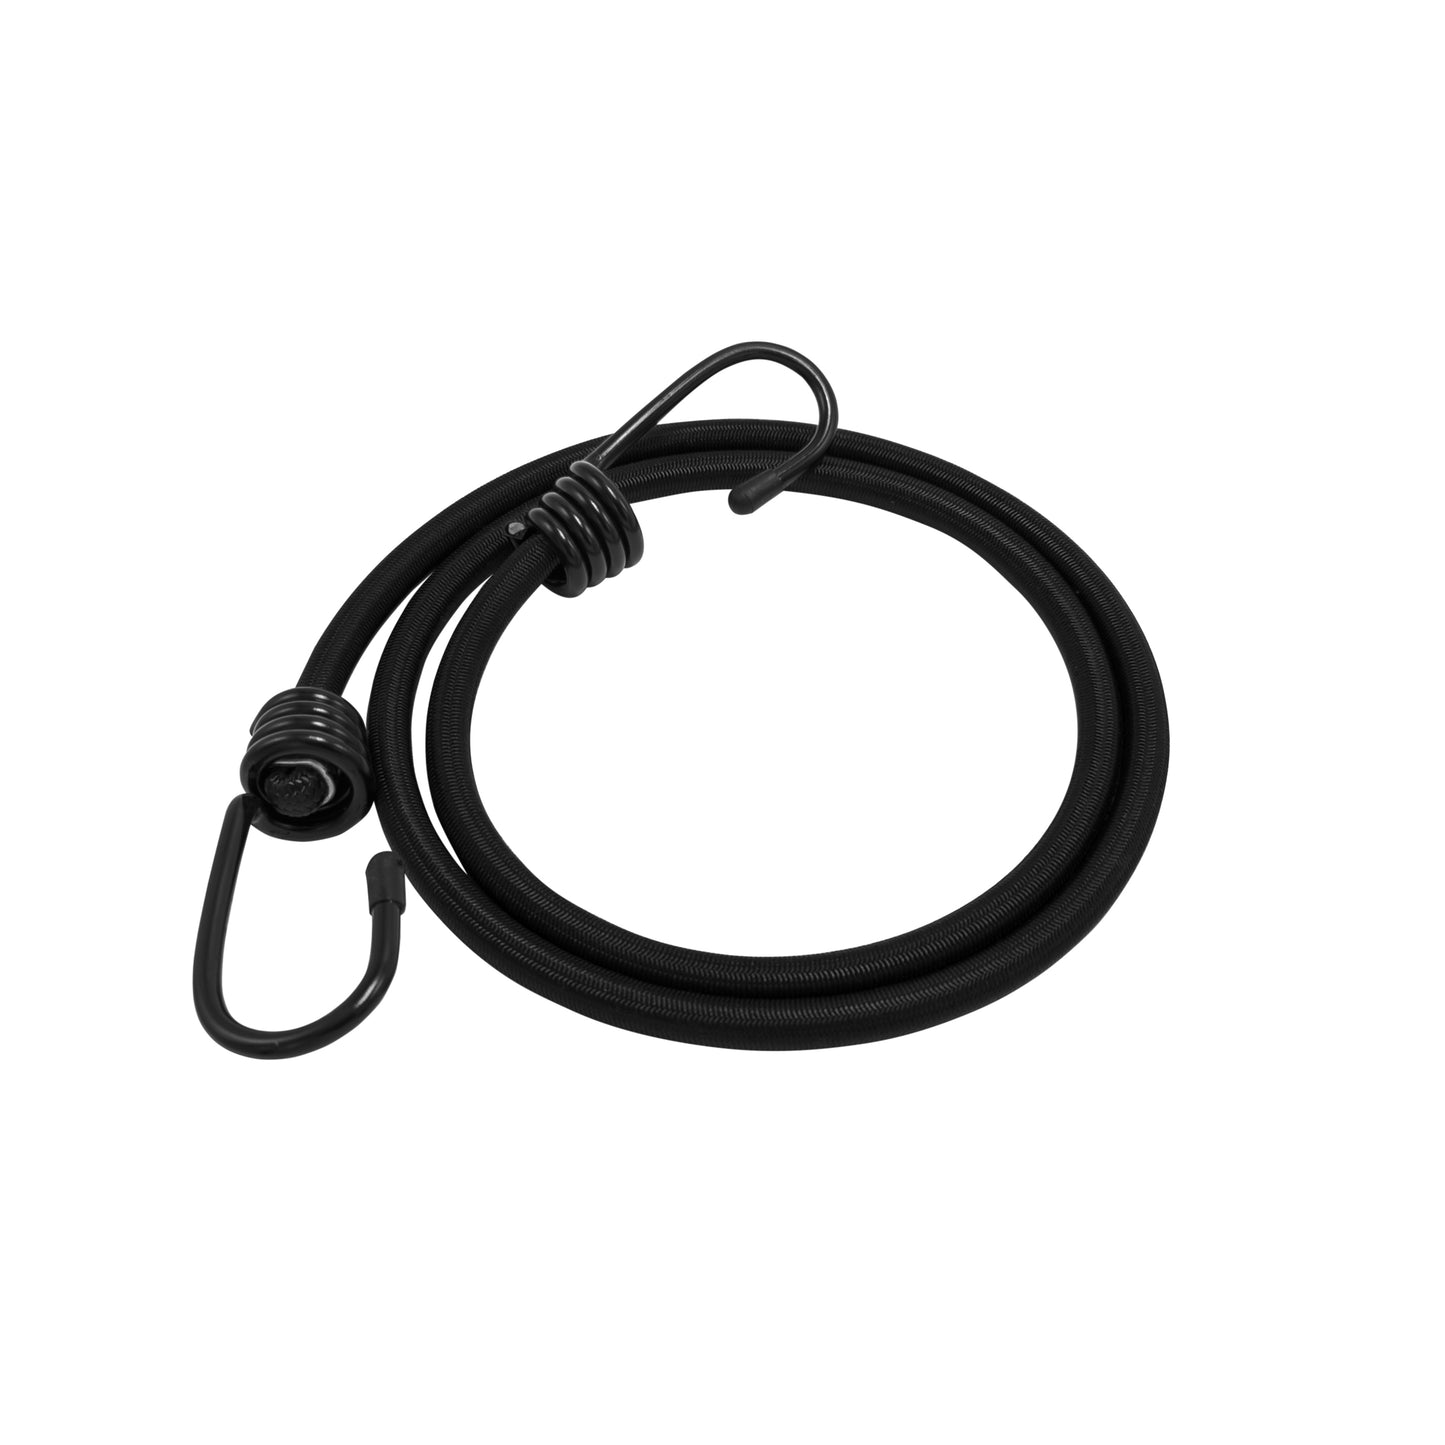 OVERLANDER BUNGEE - Marine-grade Nylon Bungee cord with two Plastic-coated Metal Spring Hooks (Black, 4-Pack)